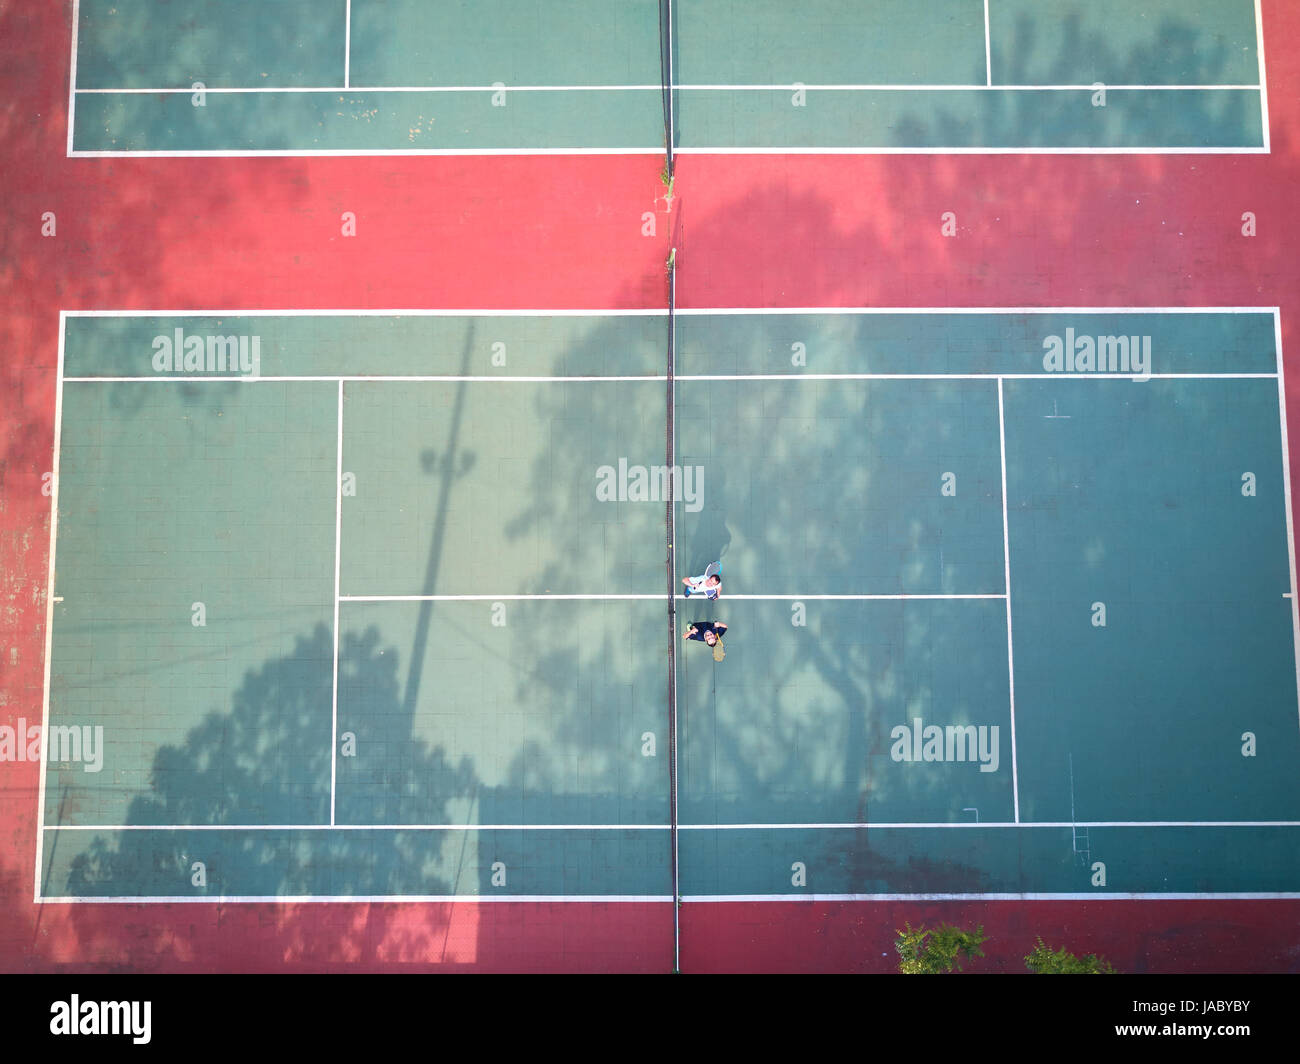 Two mans in tennis court aerial above view from drone Stock Photo